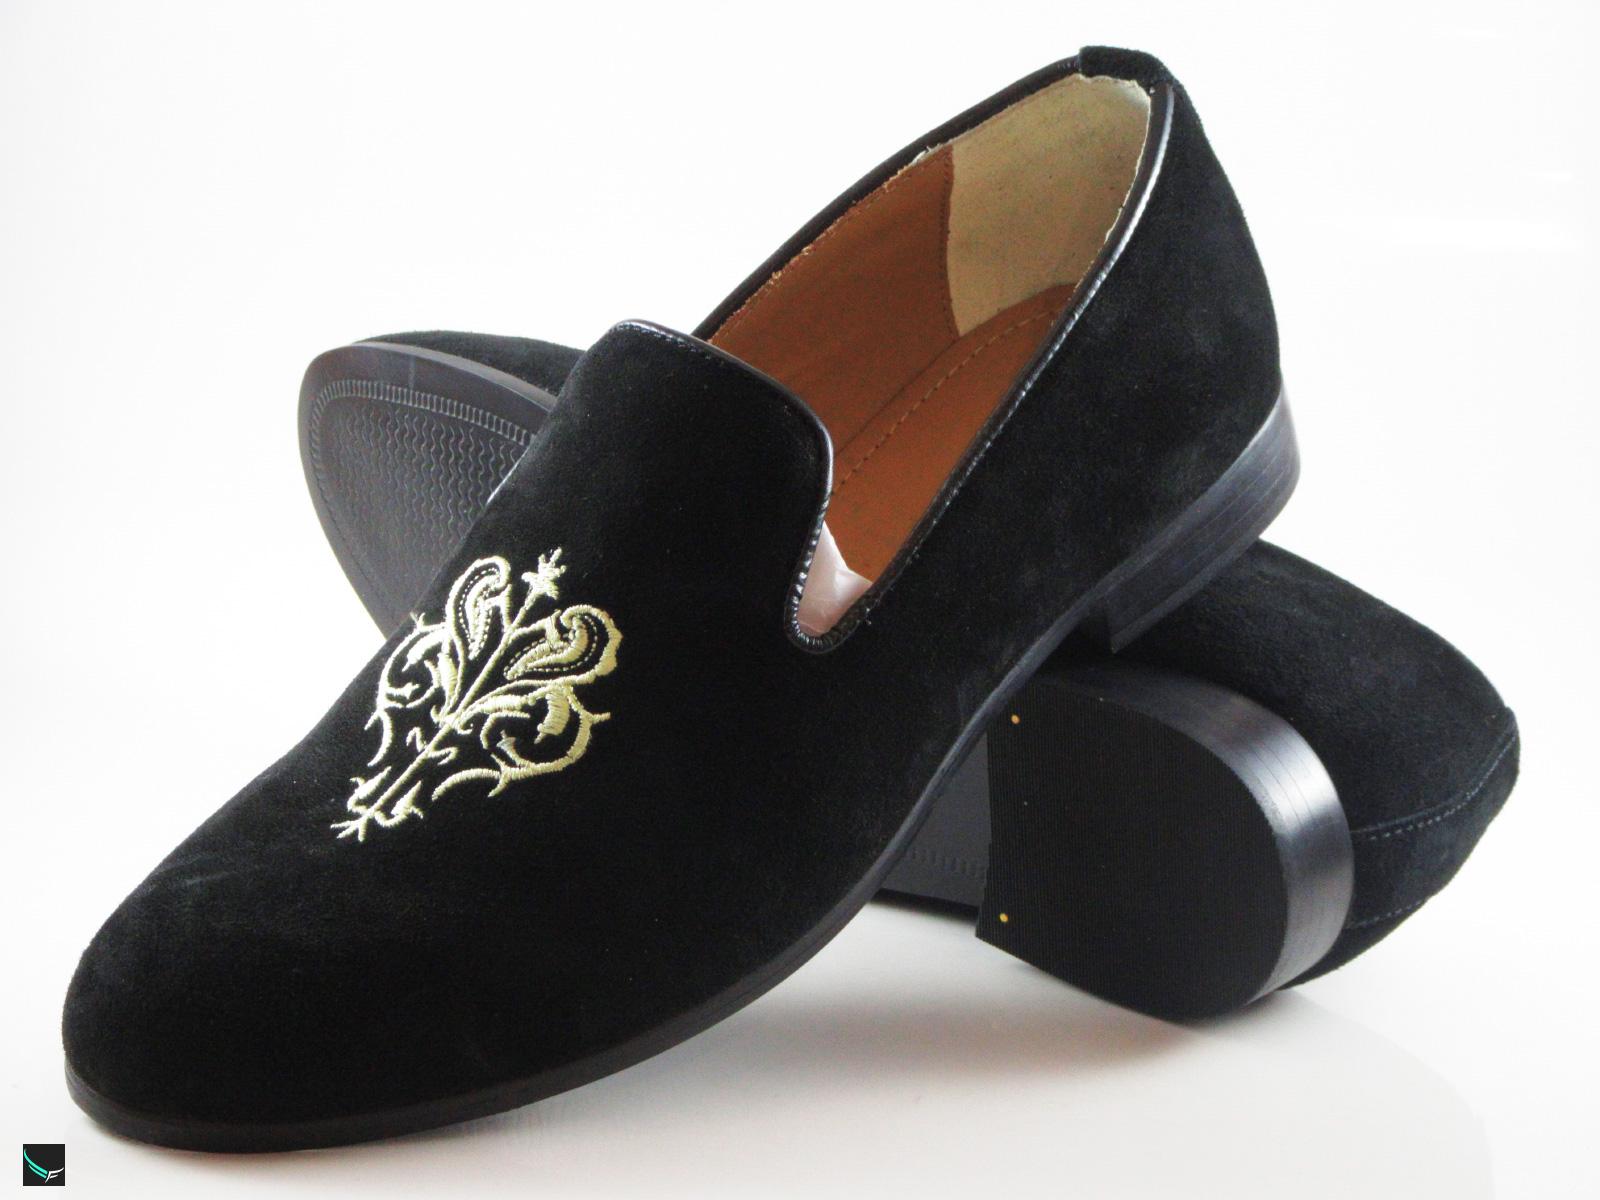 Occasional Black Loafer Shoes - 3829 